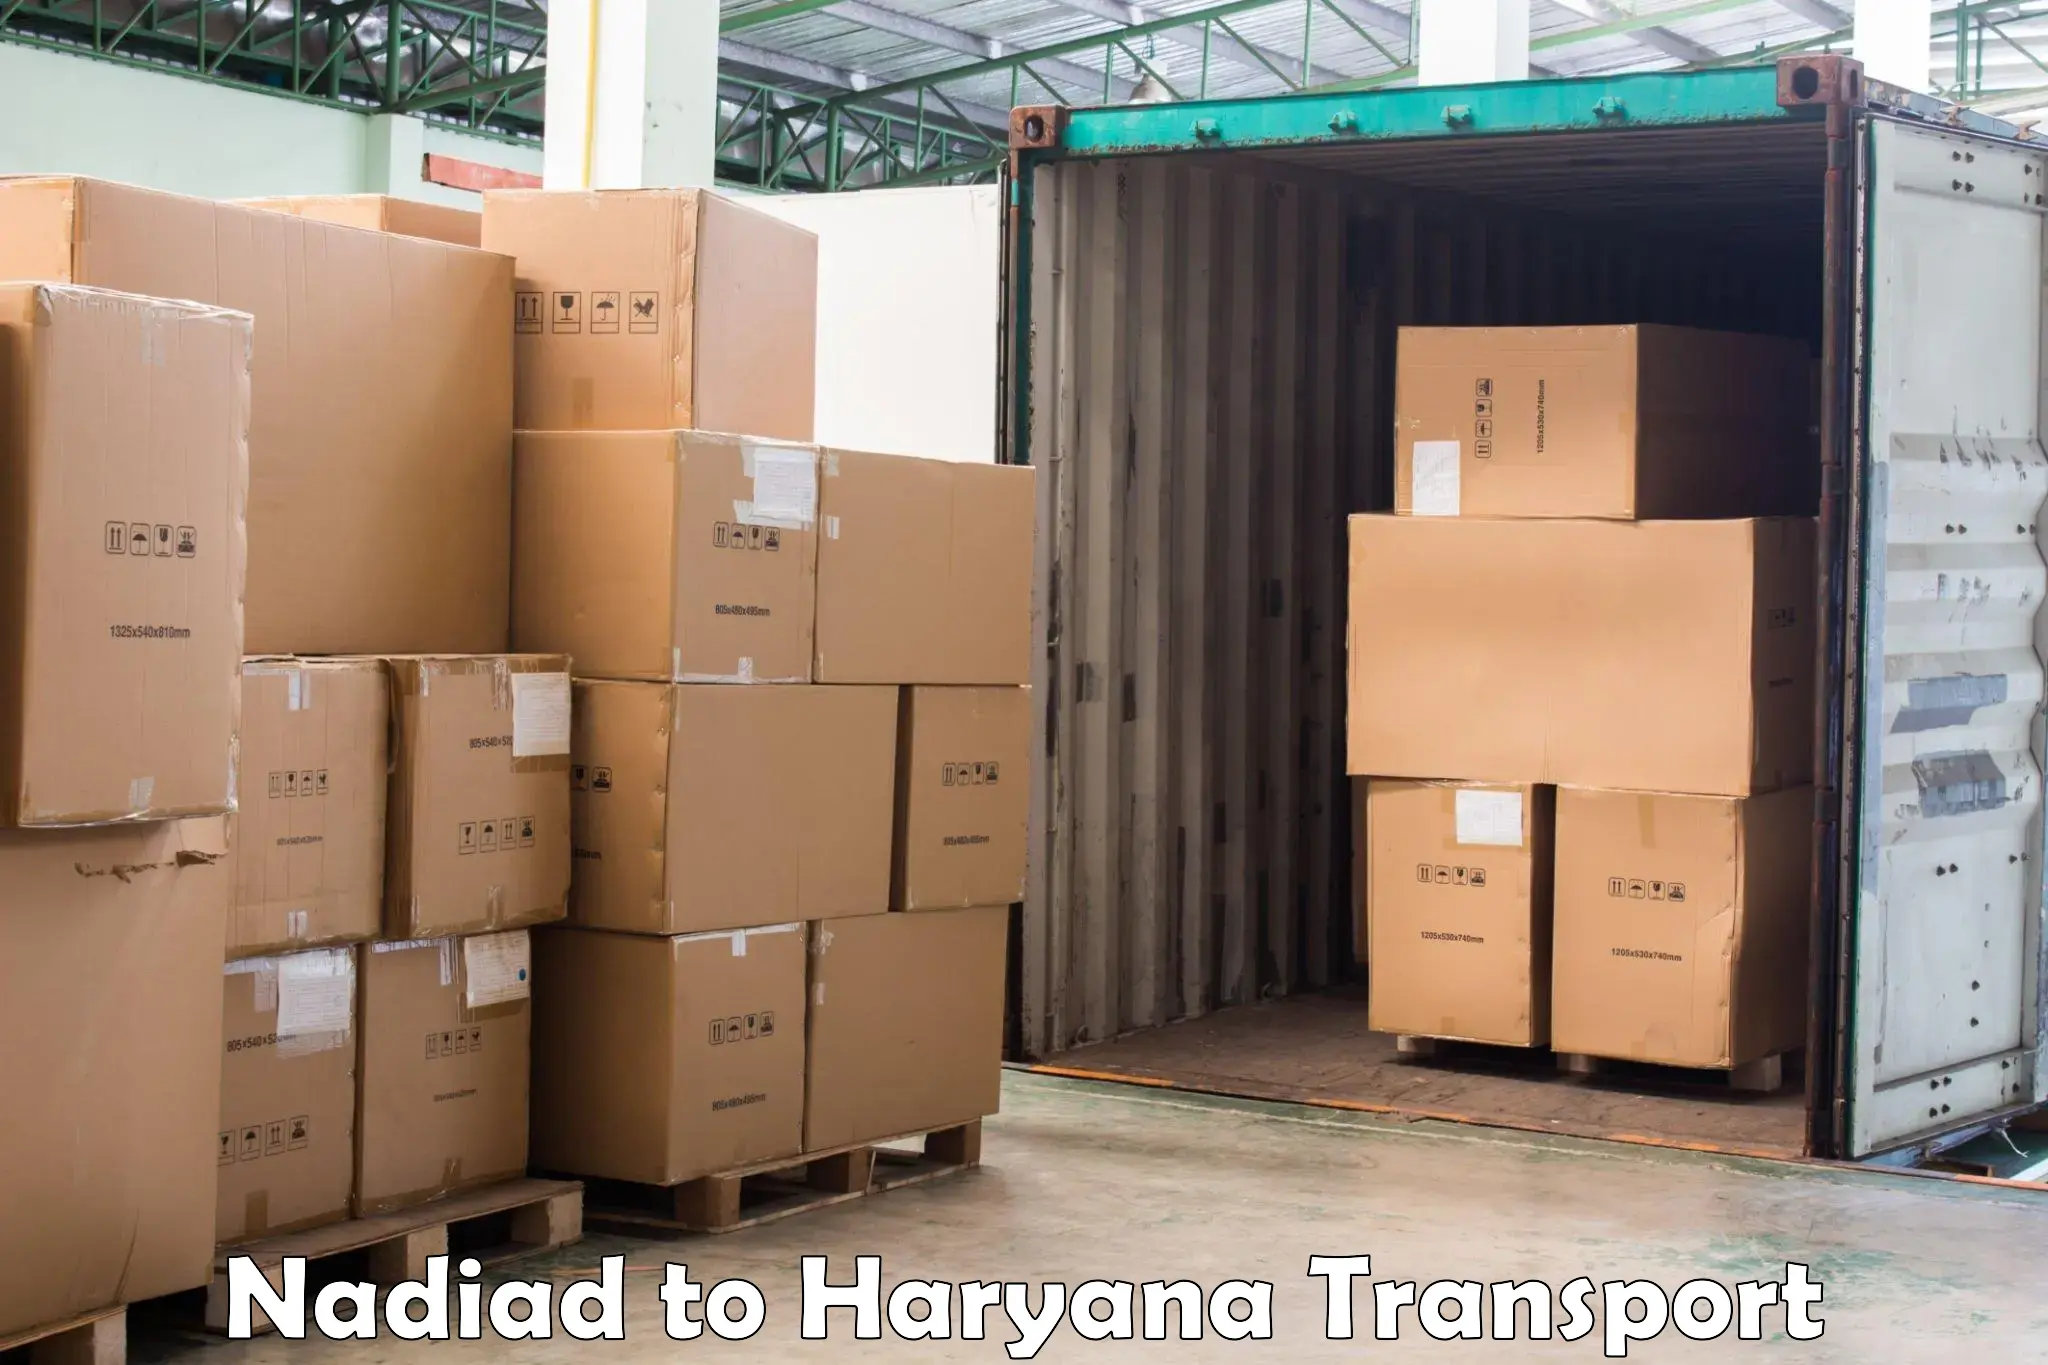 Interstate transport services Nadiad to NCR Haryana